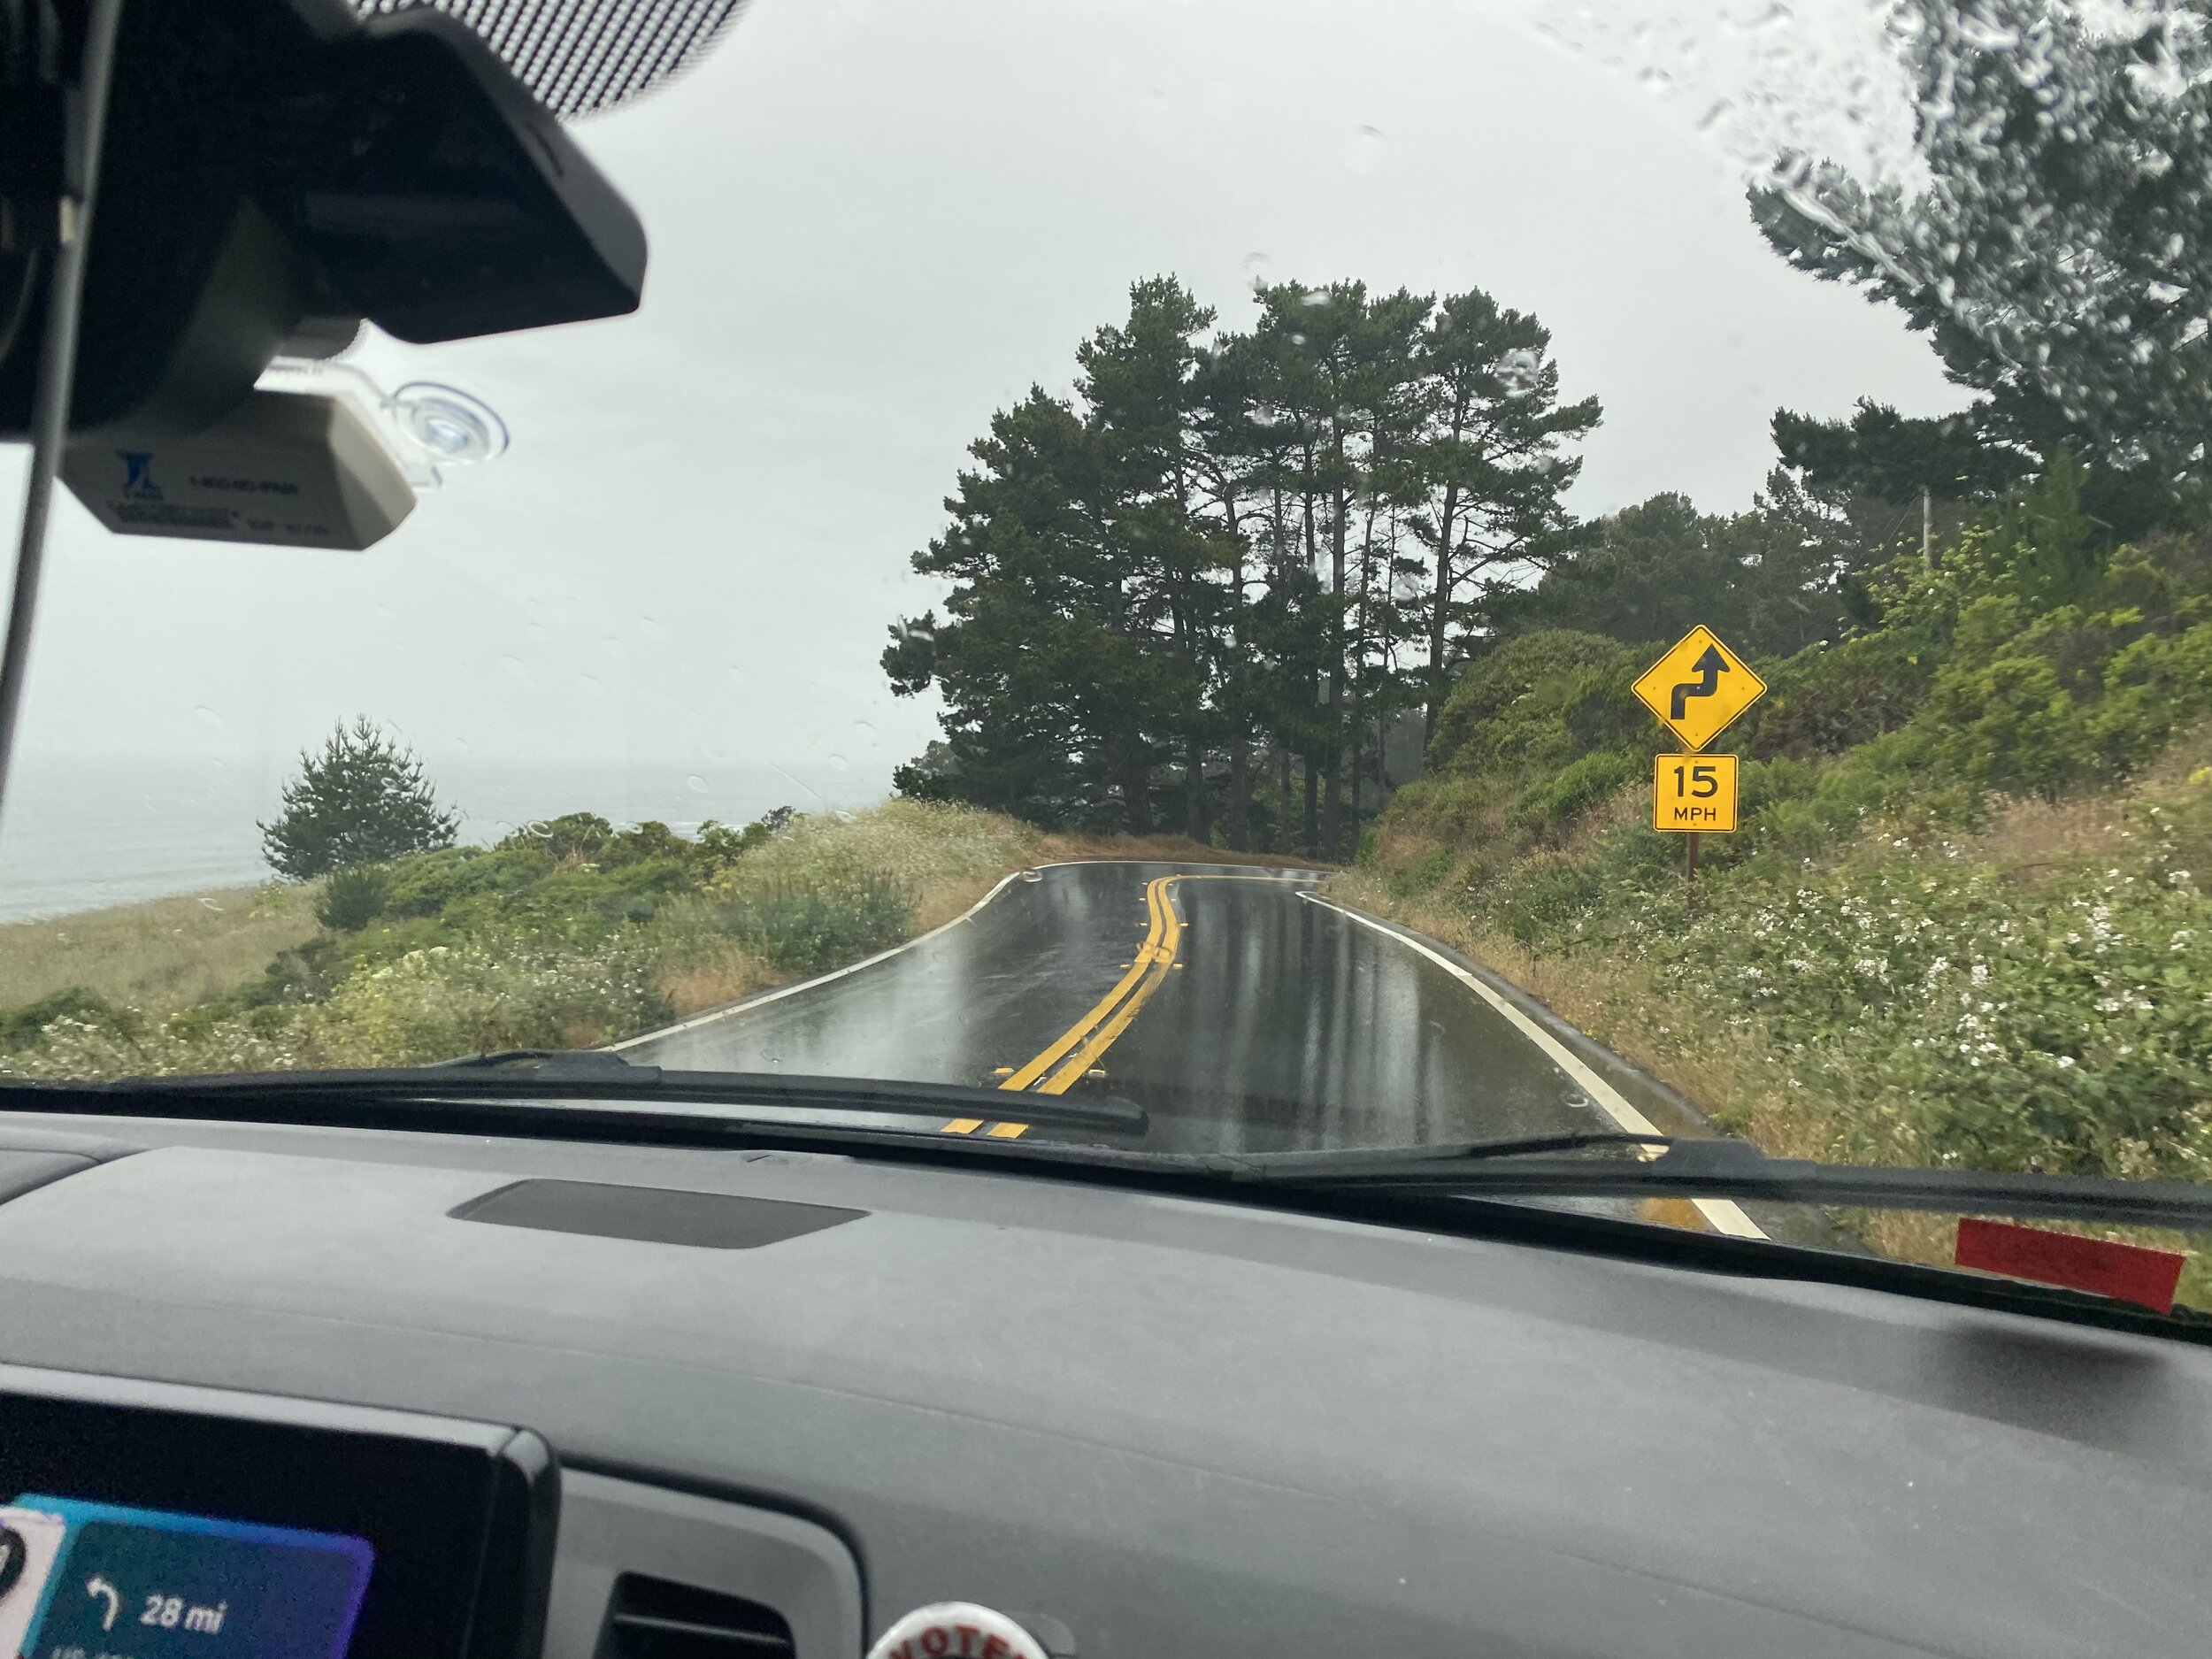 And now for the fun drive home… very sharp turns, and some rain to top it off.  Photo by Karen Boudreaux, June 11, 2021